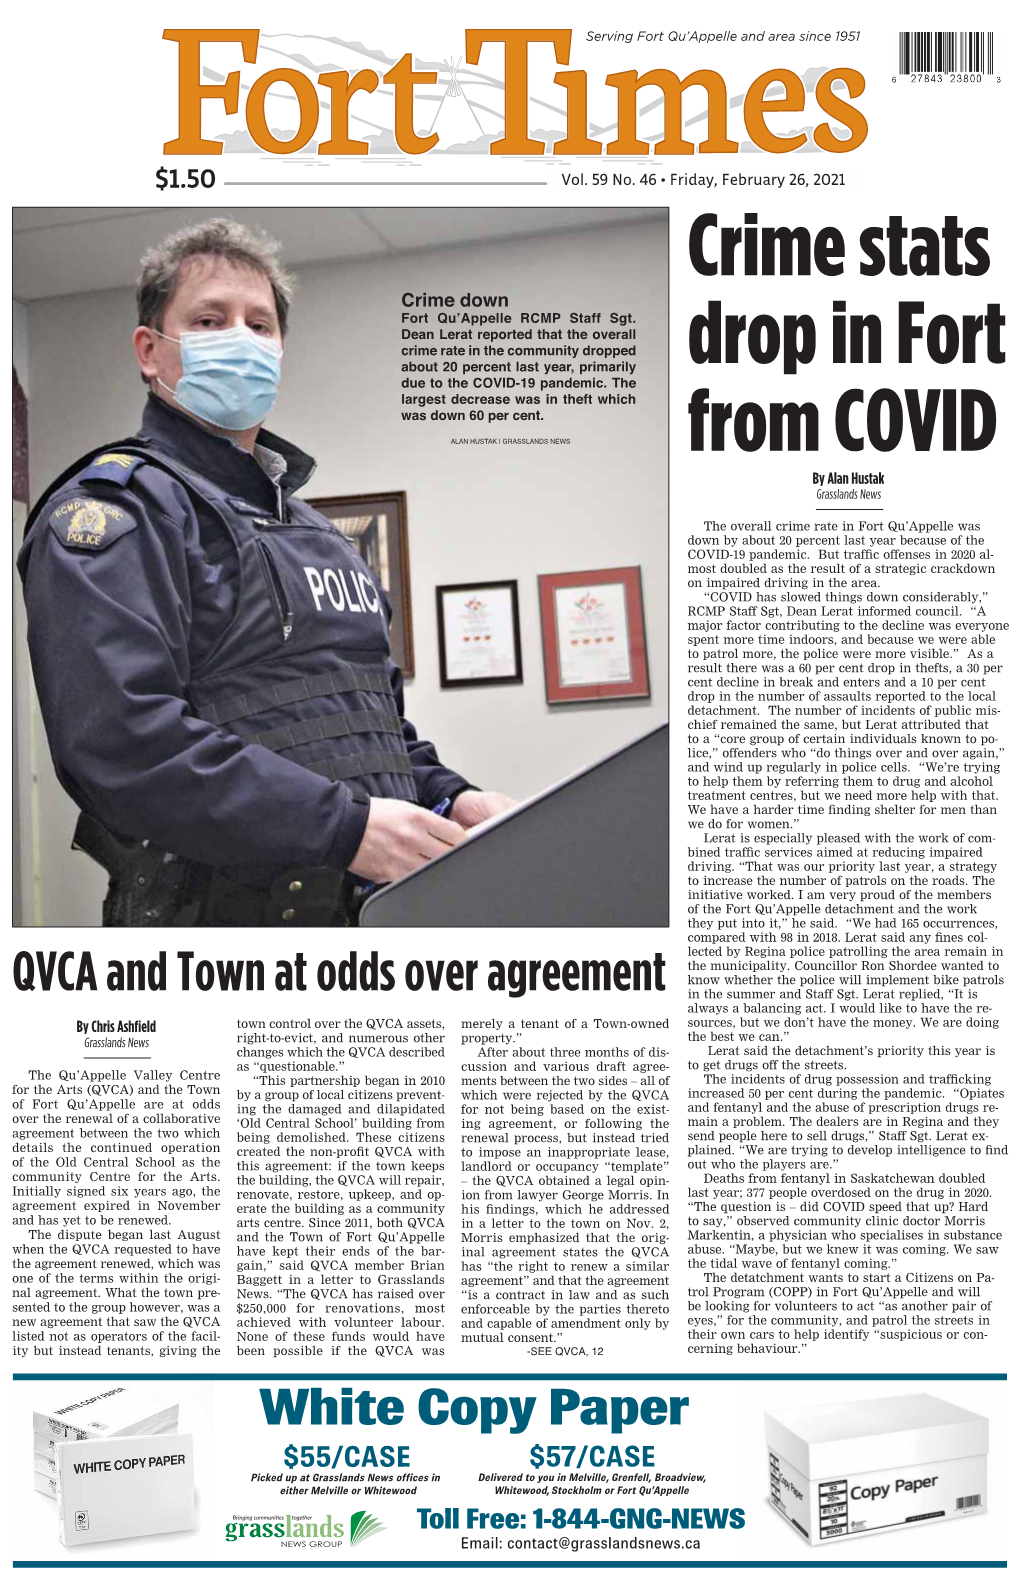 Crime Stats Drop in Fort from COVID